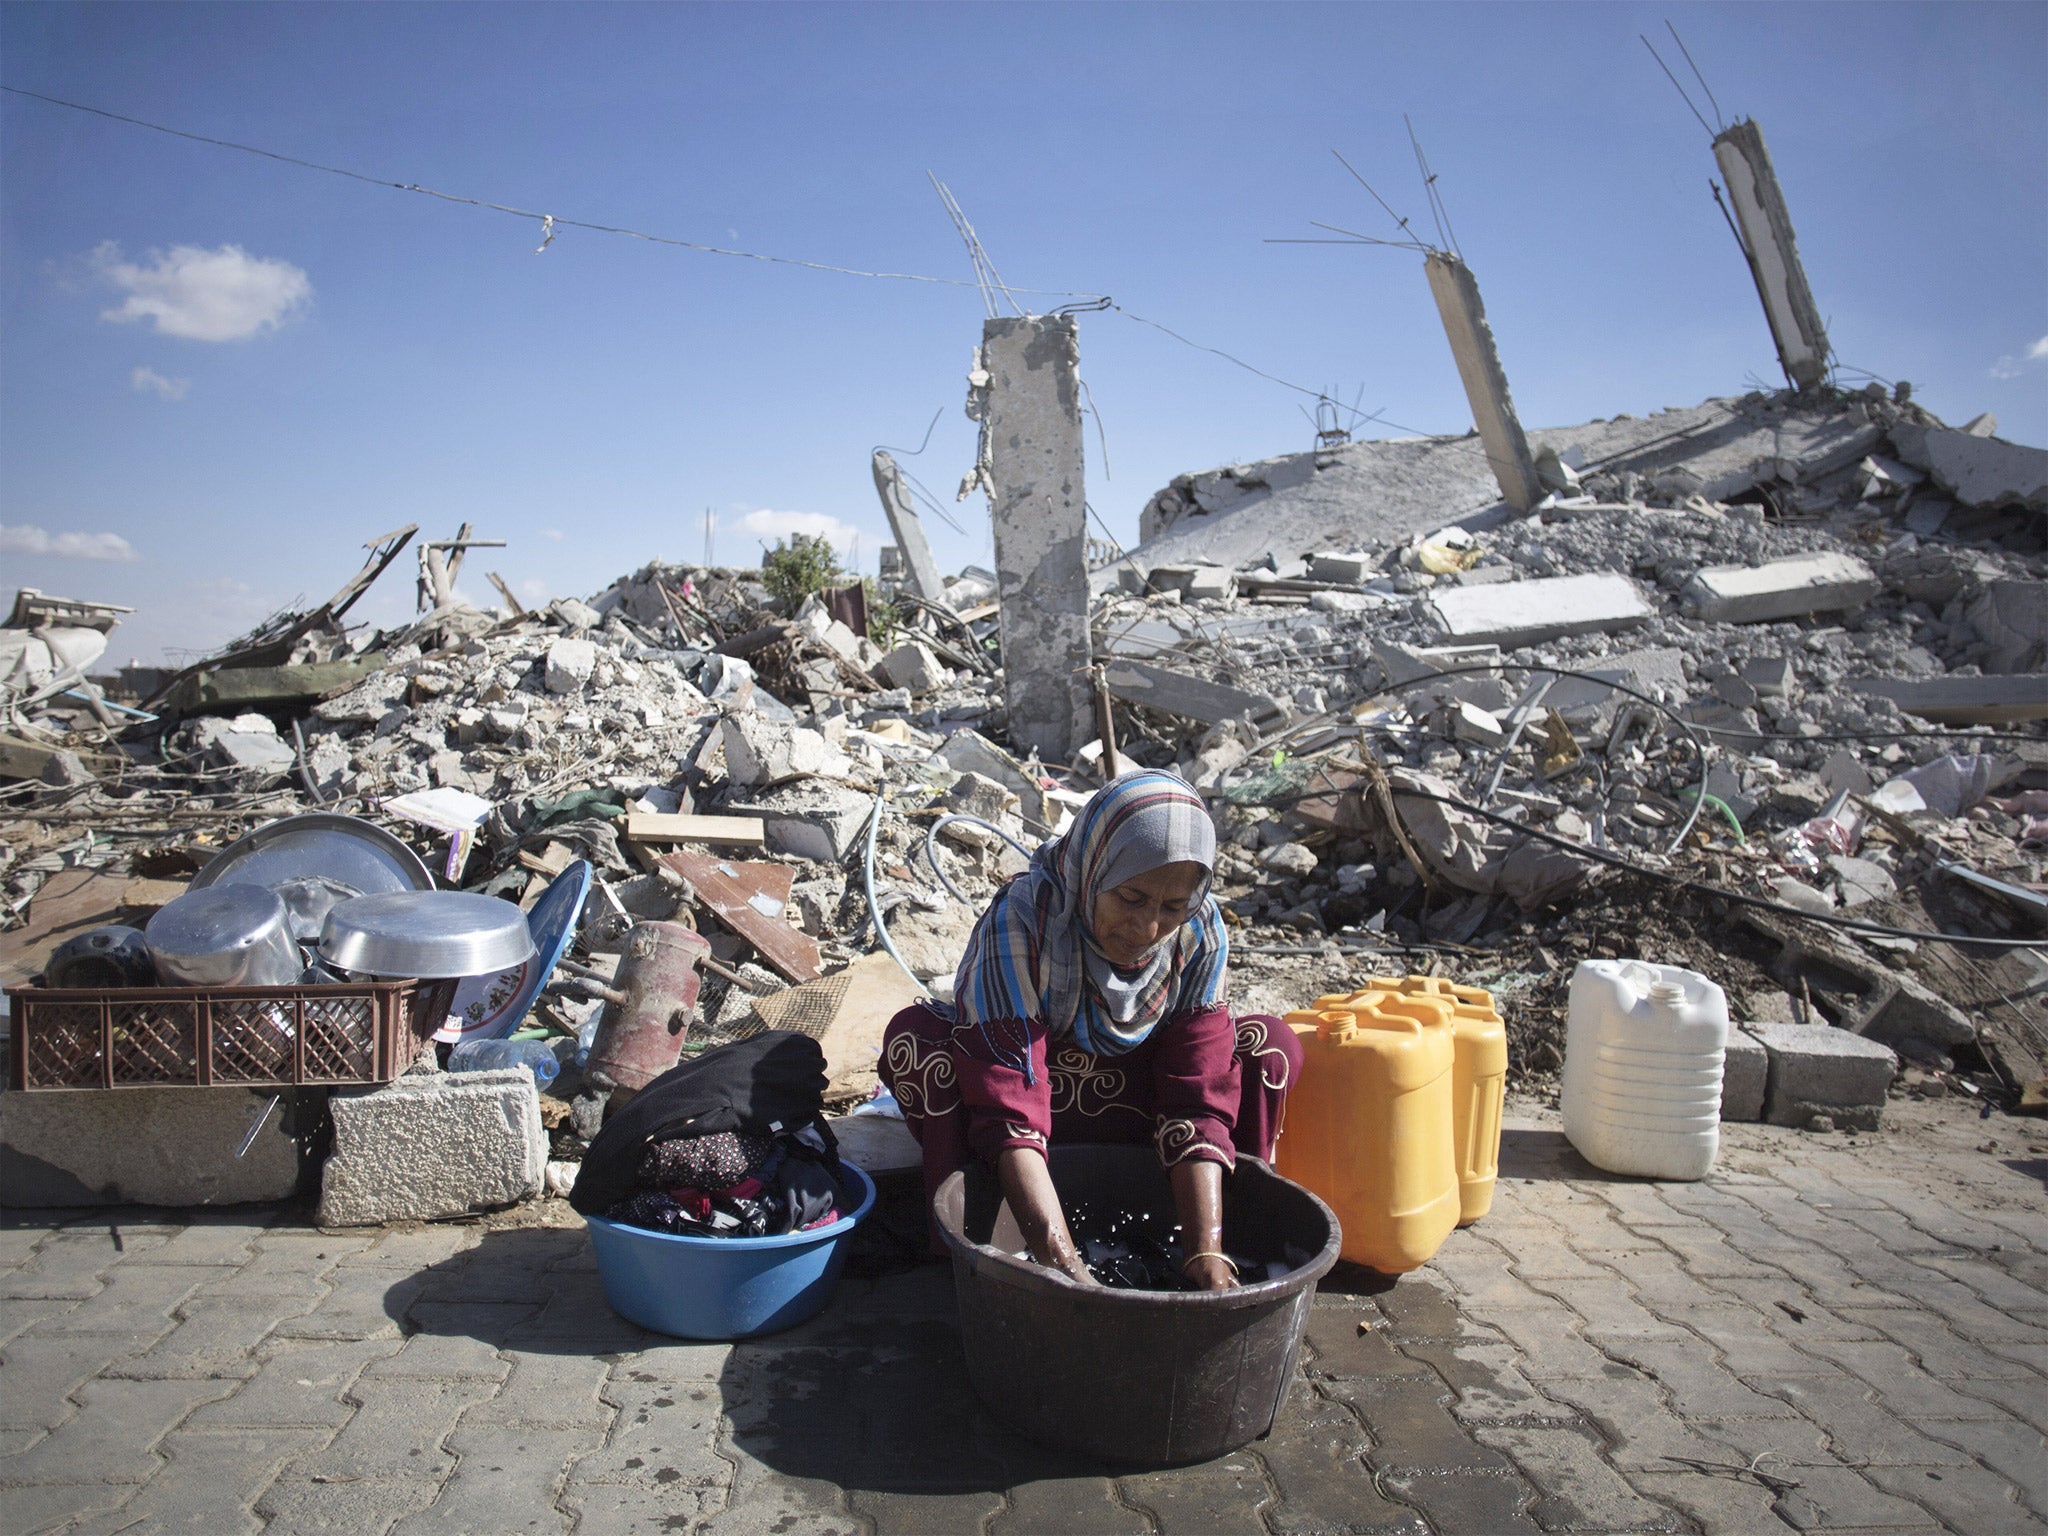 The blockade is widely blamed for paralysing Gaza’s economy, impoverishing most of its 1.8 million residents